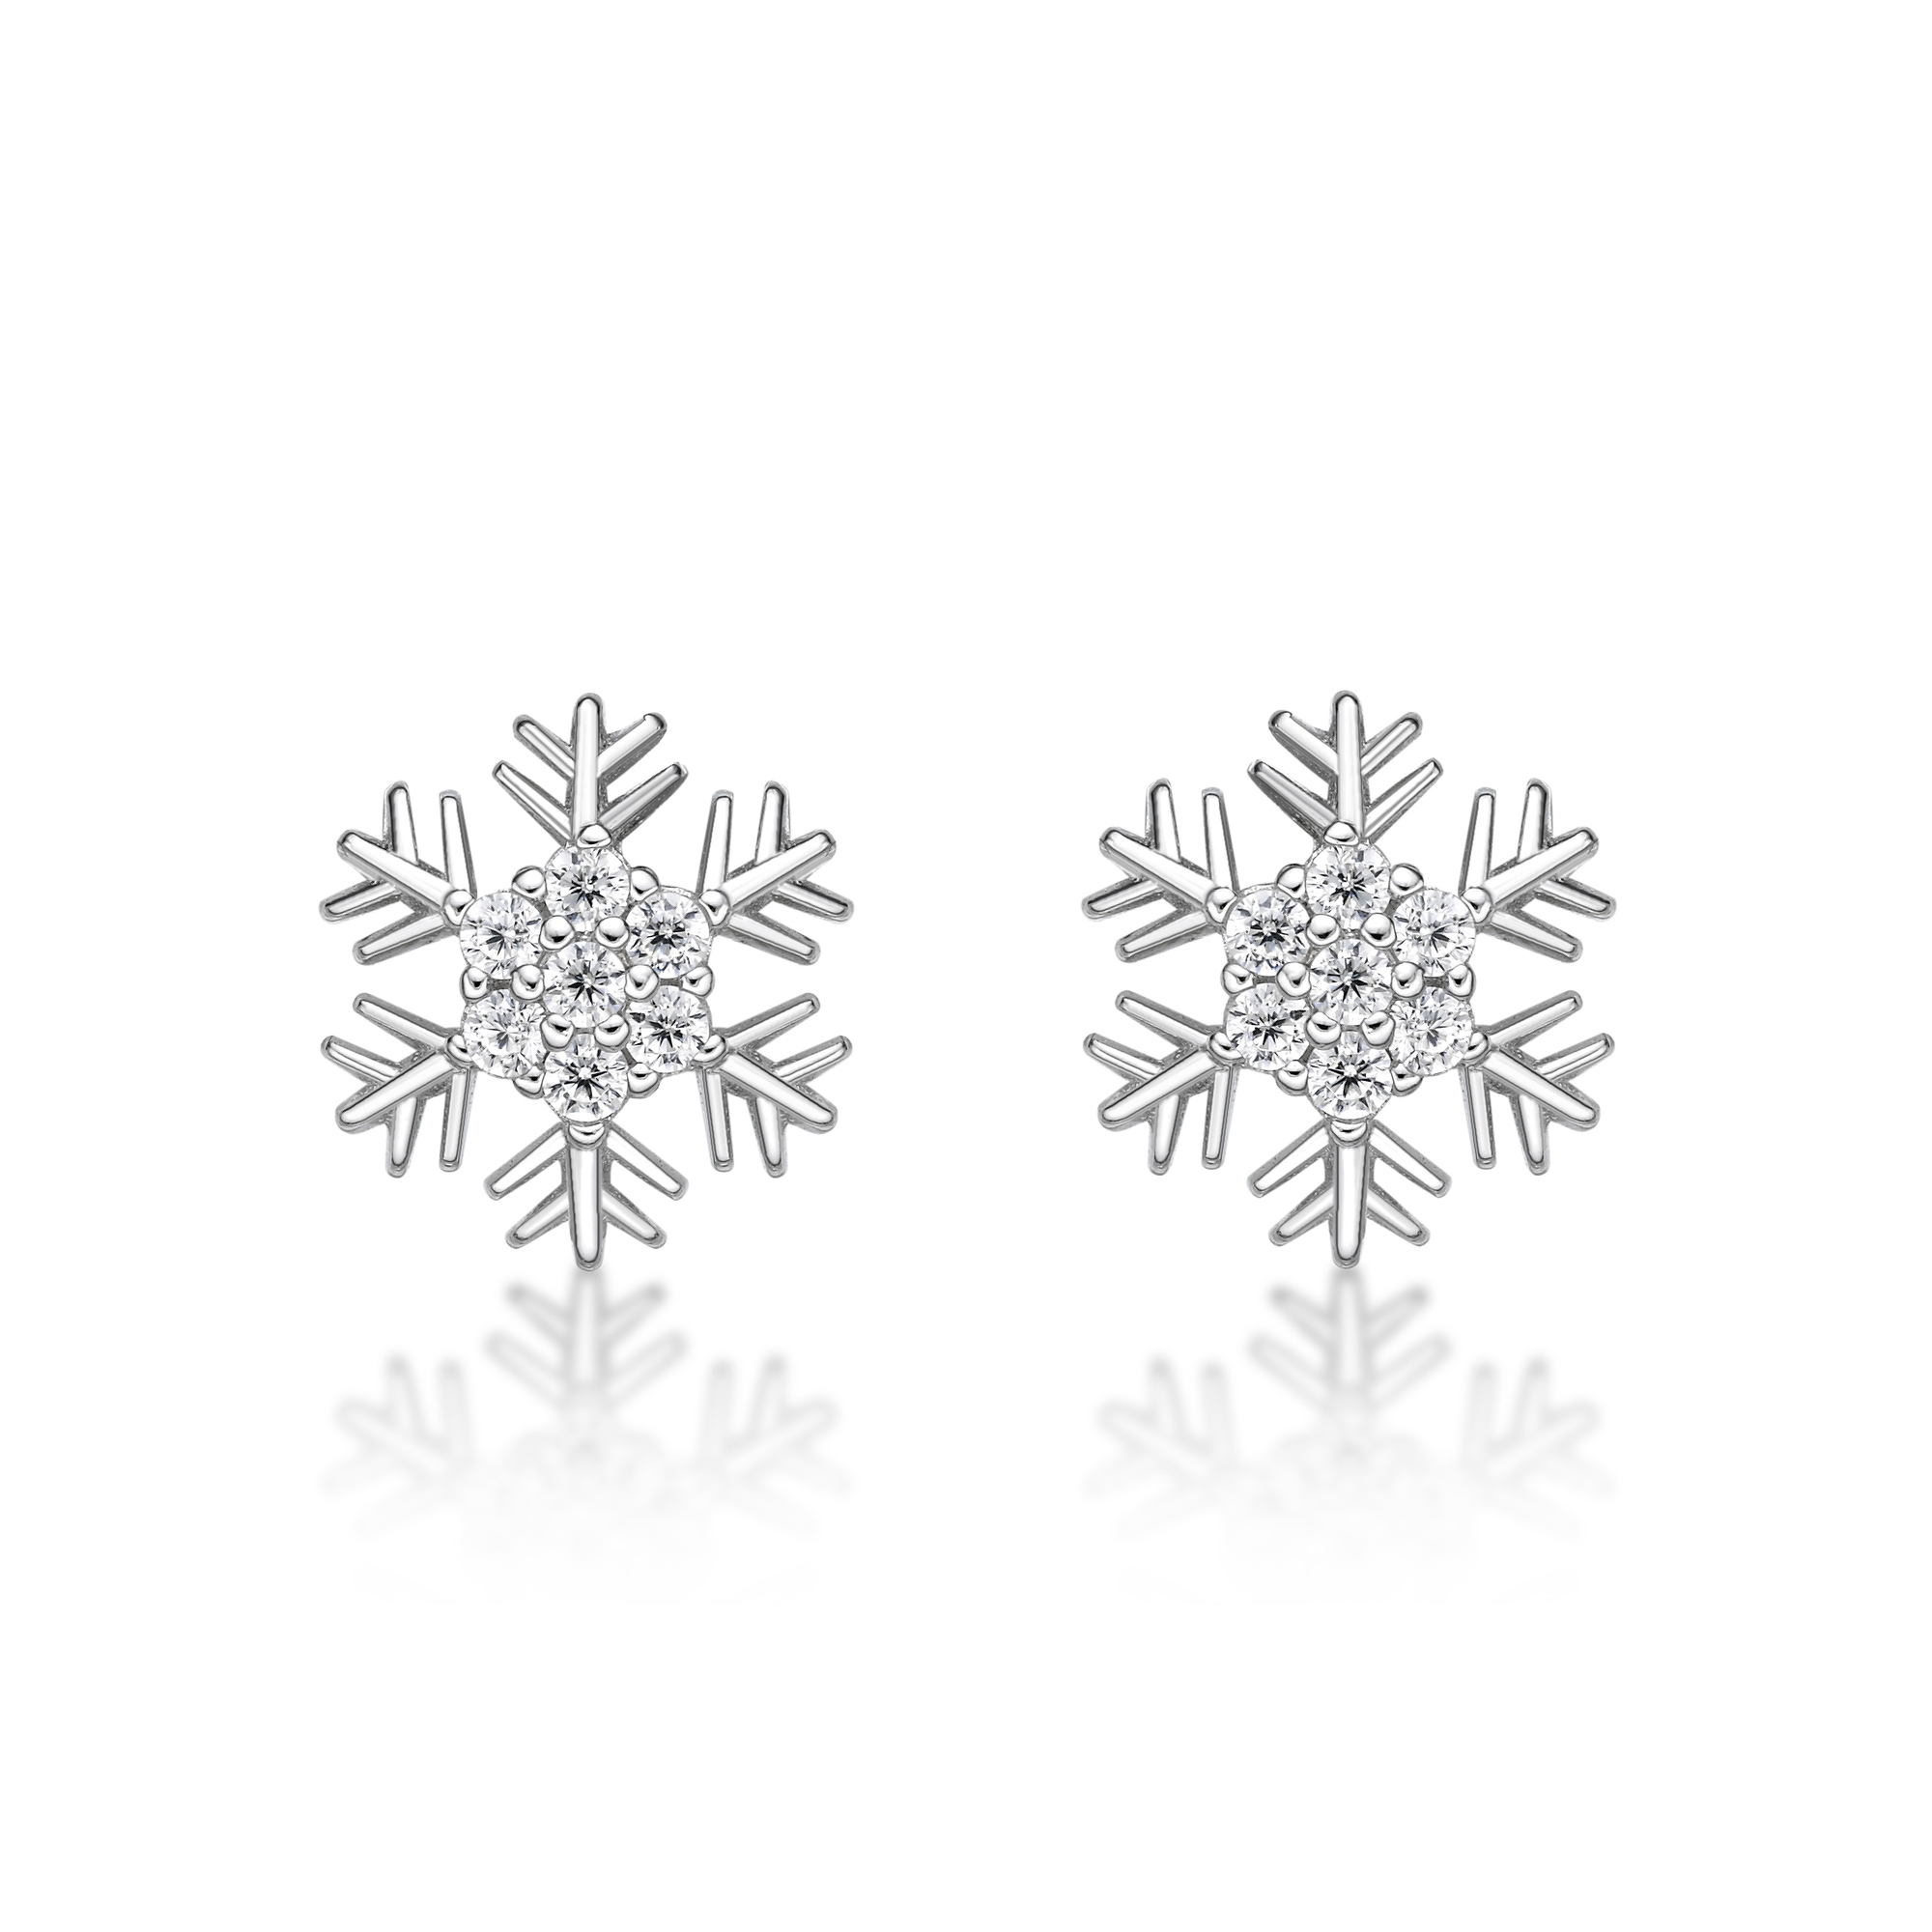 Women's Snowflake Stud Earrings with Friction Back, 925 Sterling Silver, Cubic Zirconia, 10 MM - Flurry | Lavari Jewelers